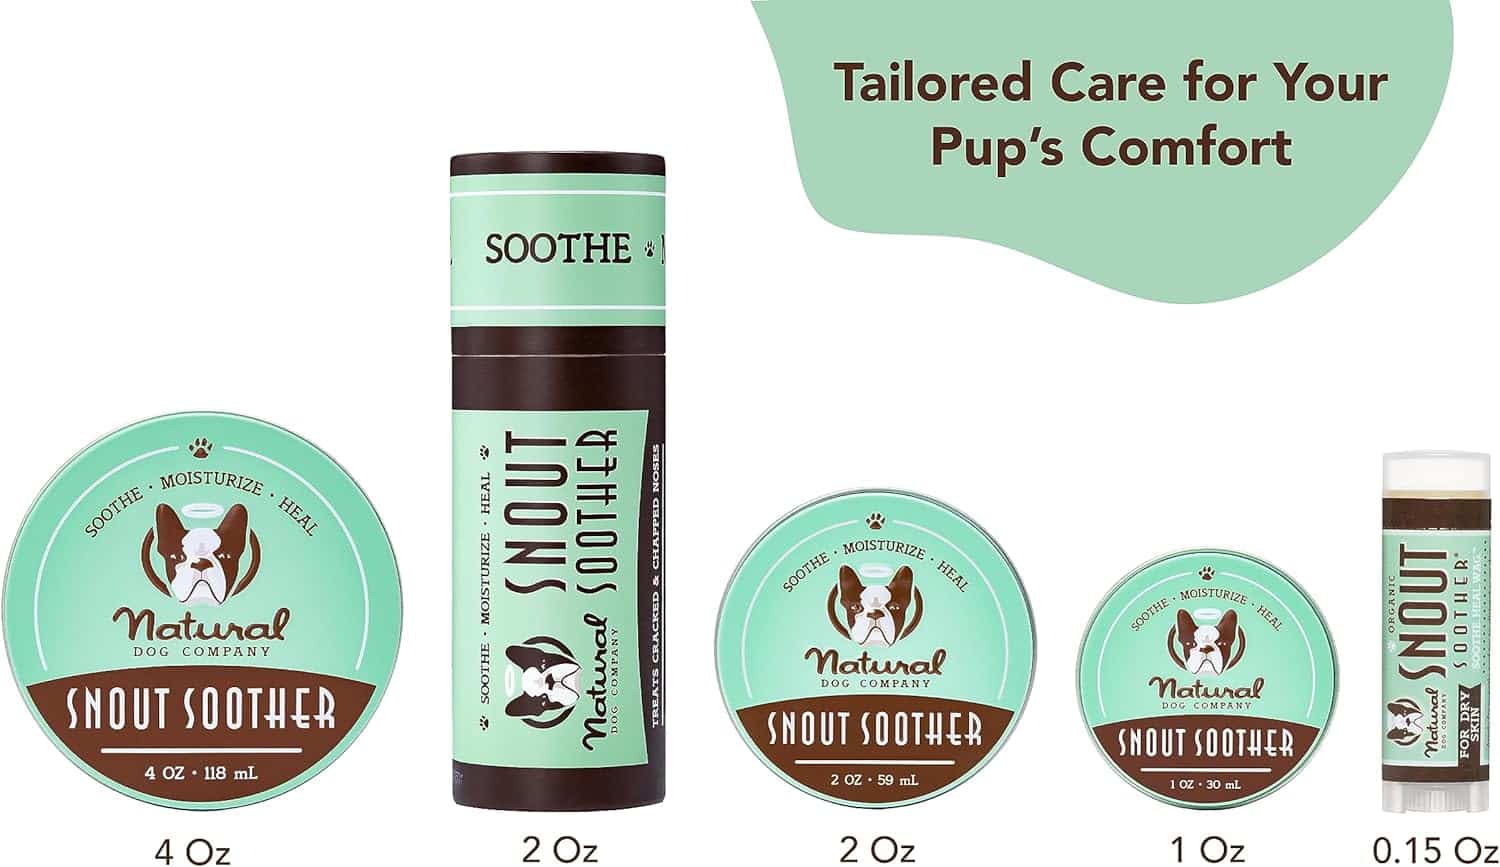 Natural Dog Company Snout Soother Review: The Ultimate Solution for Dry, Cracked Noses